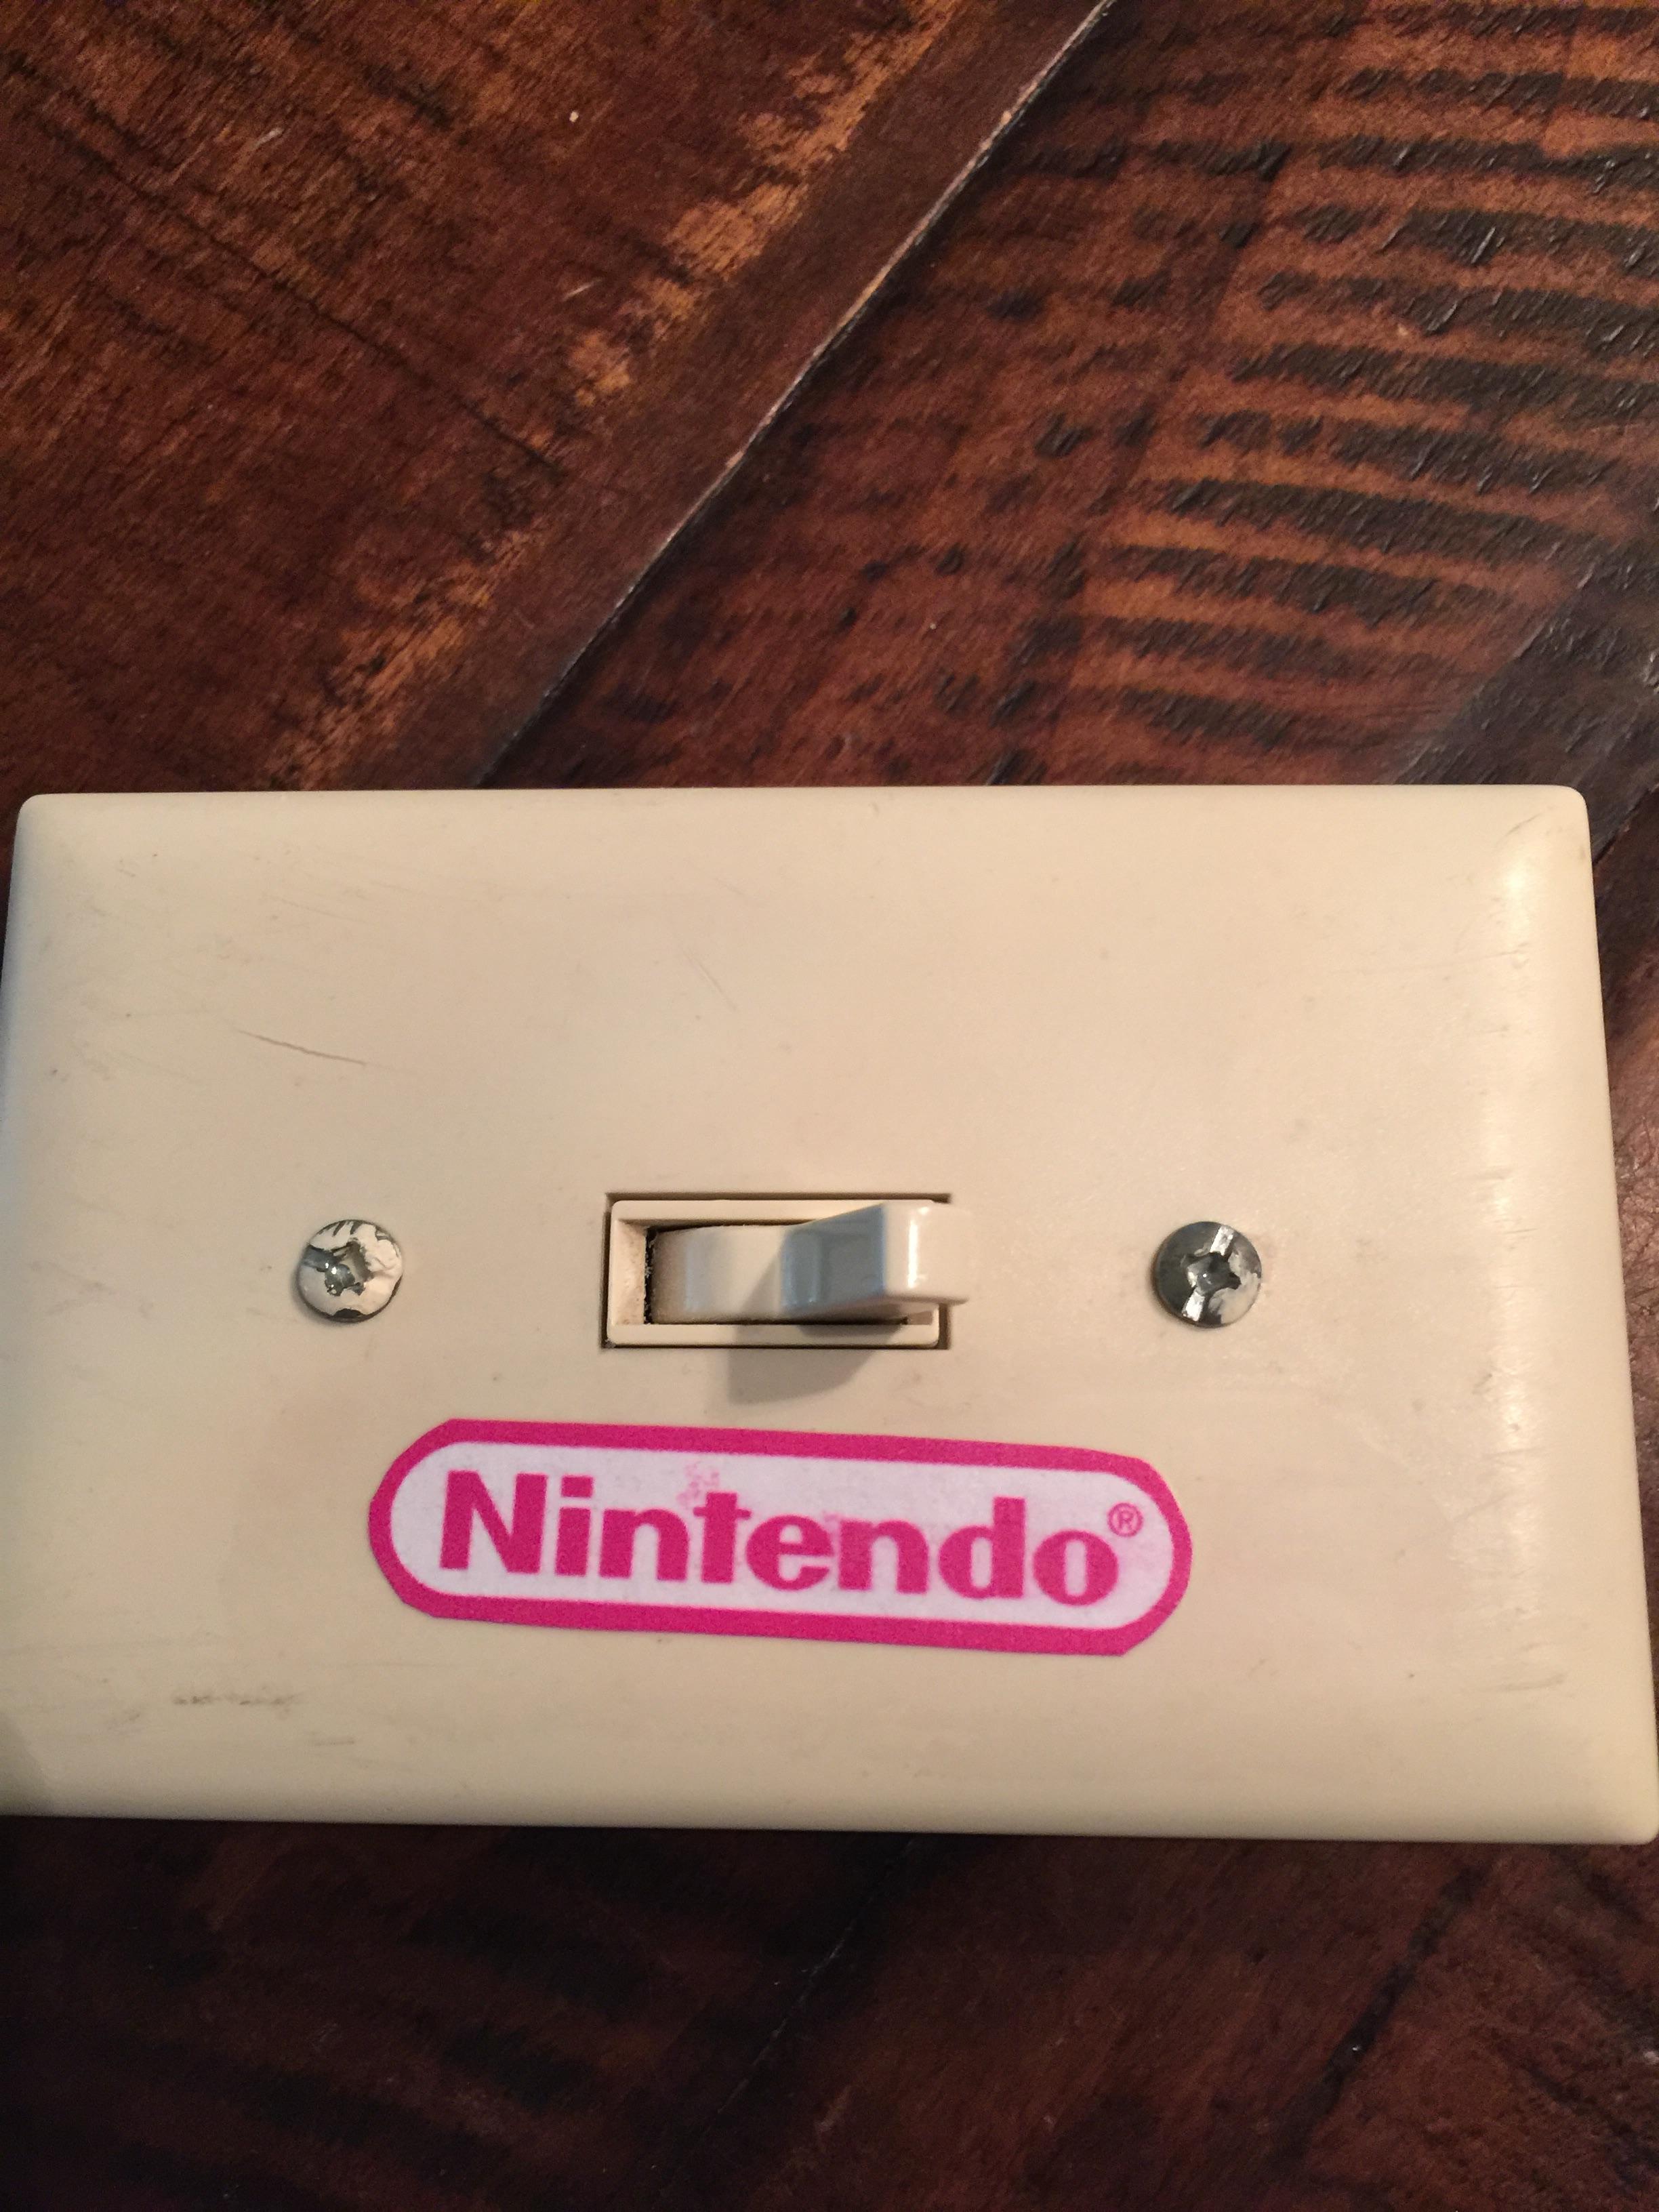 Got the family a Switch for Christmas.